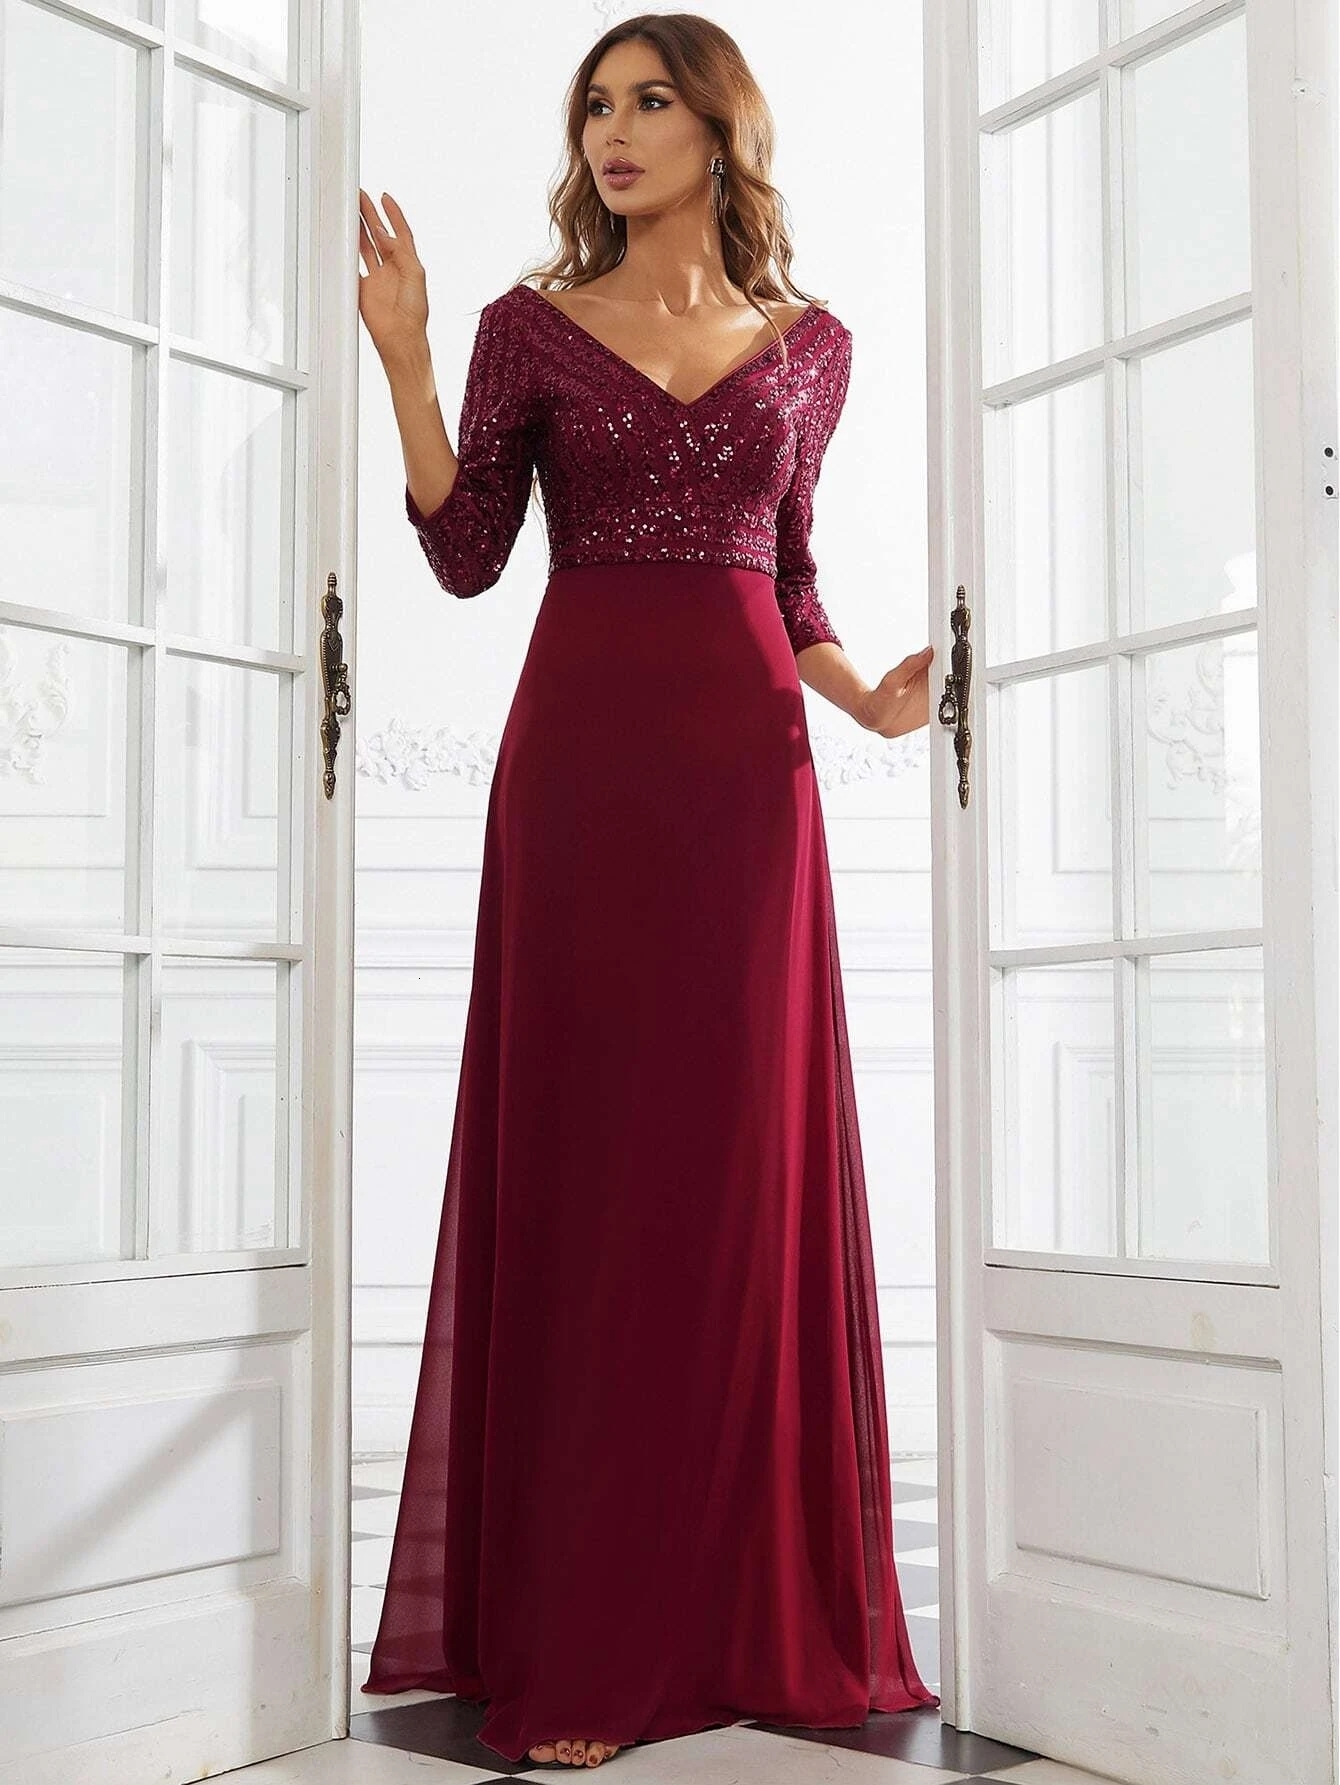 

Party Dresses Elegant Evening Long V Neck A Line Floor Length Gown Ever Pretty of Contrast Sequin Chiffon Simple Prom Women Dress 221119, Orchid